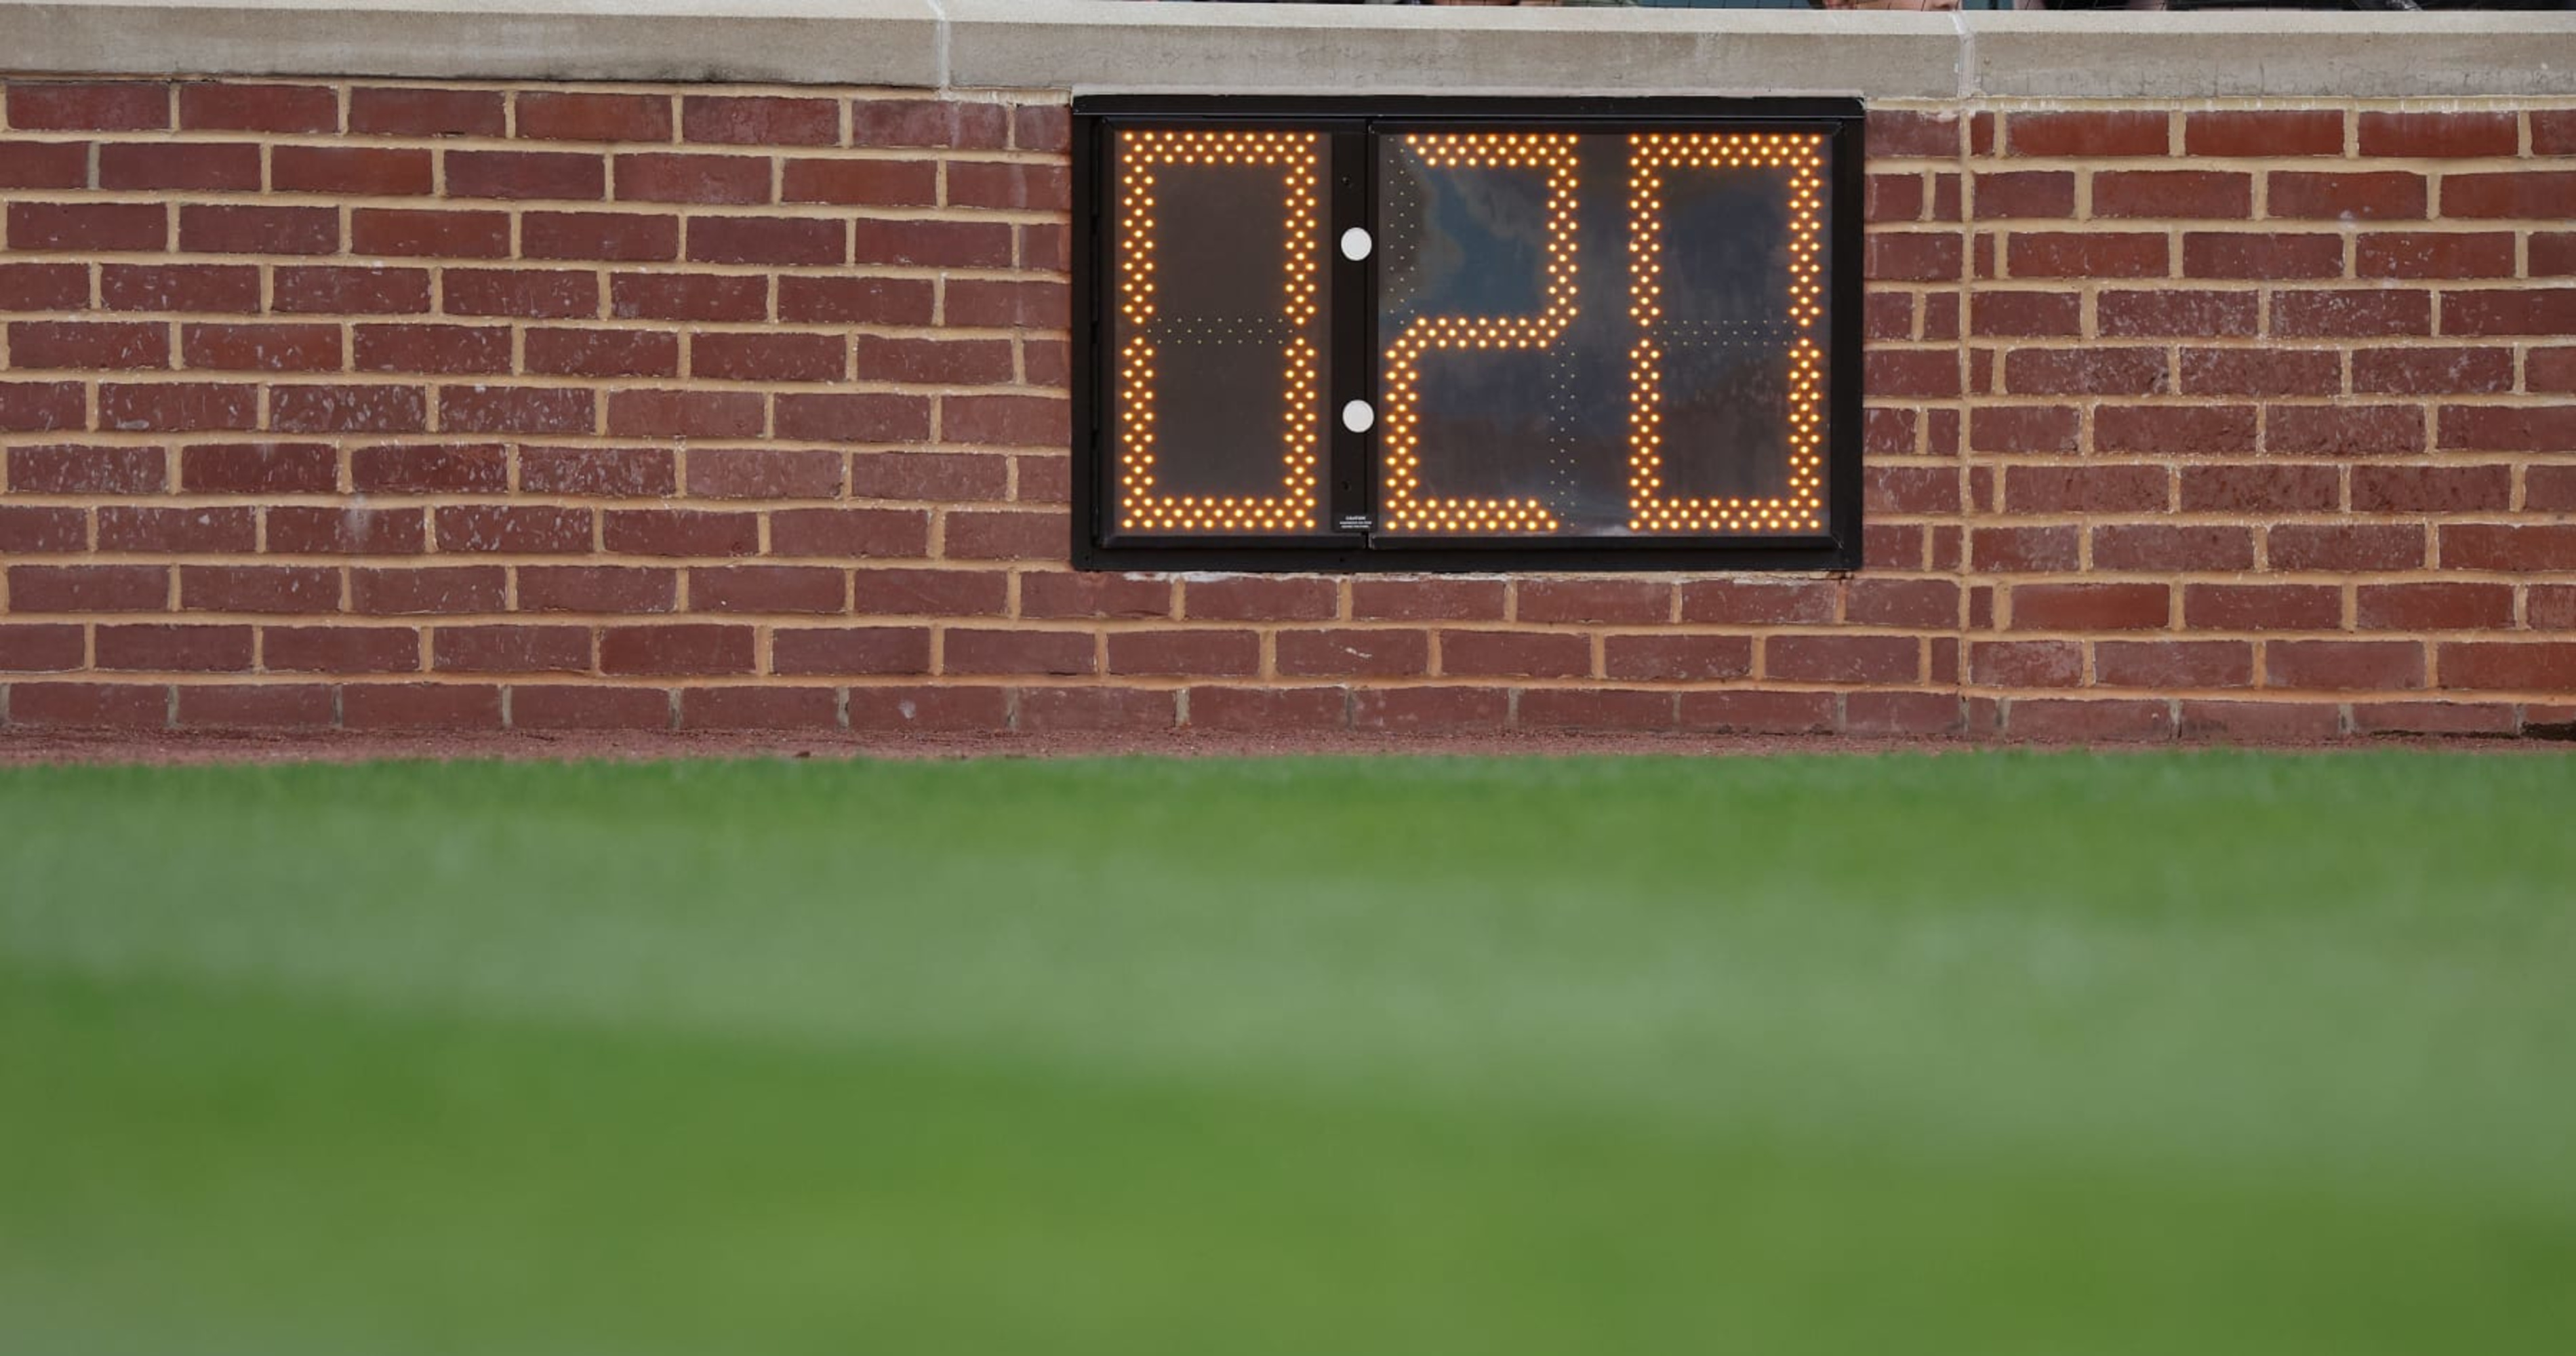 MLB won't extend the pitch clock for the postseason - NBC Sports